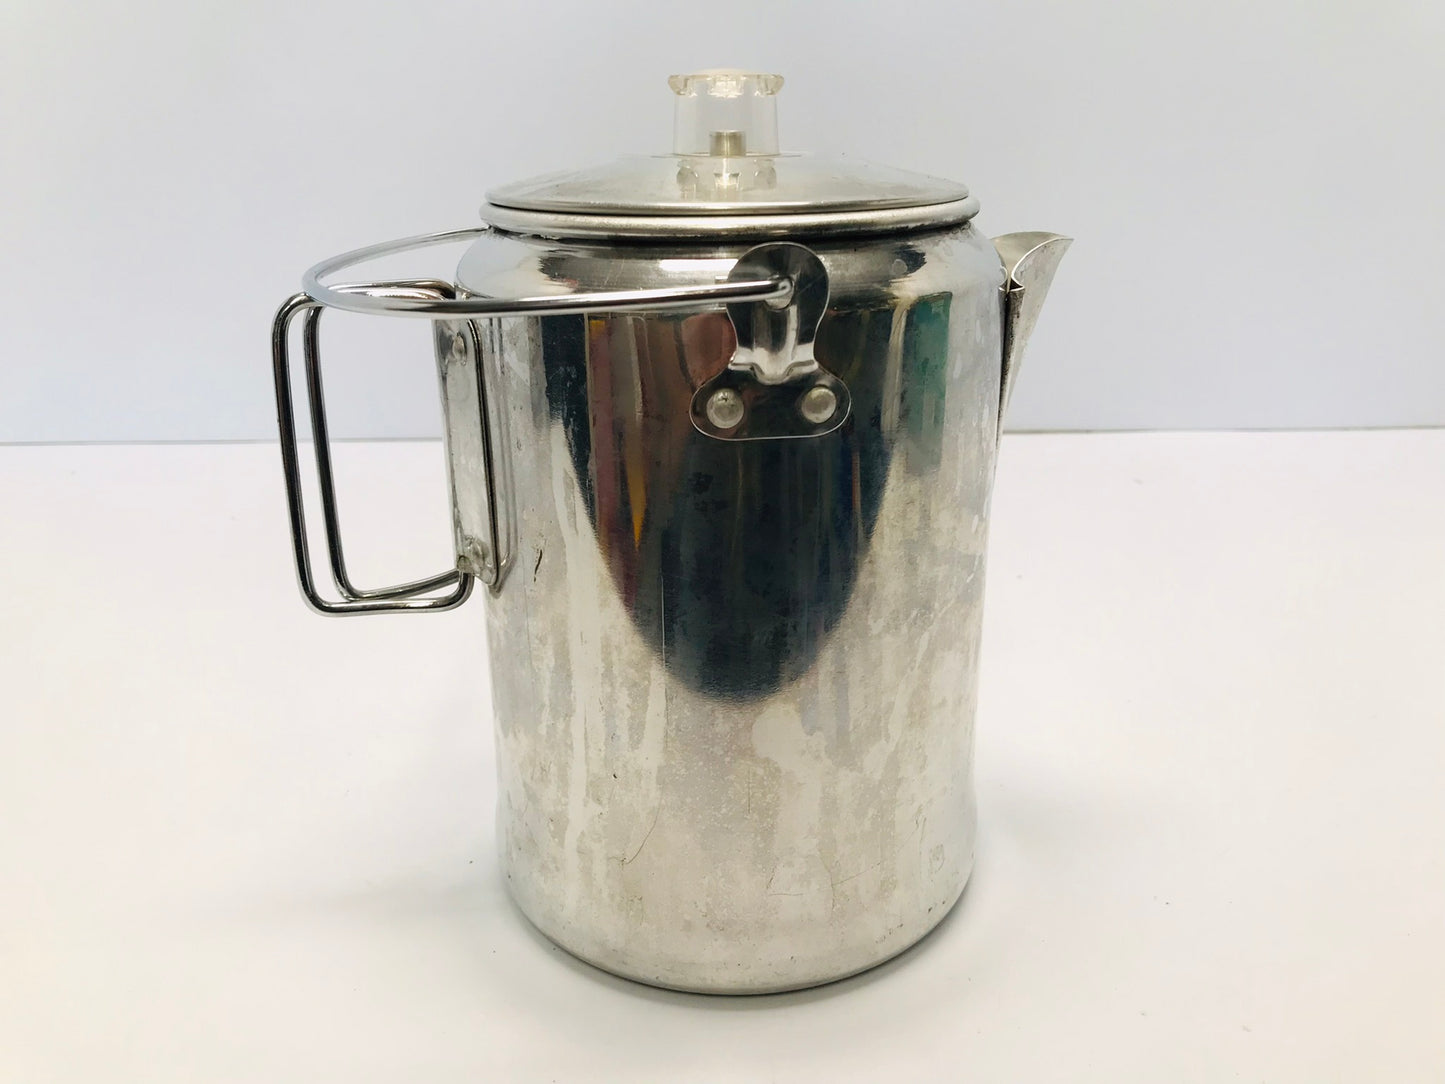 Camping Coffee Pot Perolator 6-8 cup Aluminum Rustproof Fast Heat Up Outdoor Use Excellent As New